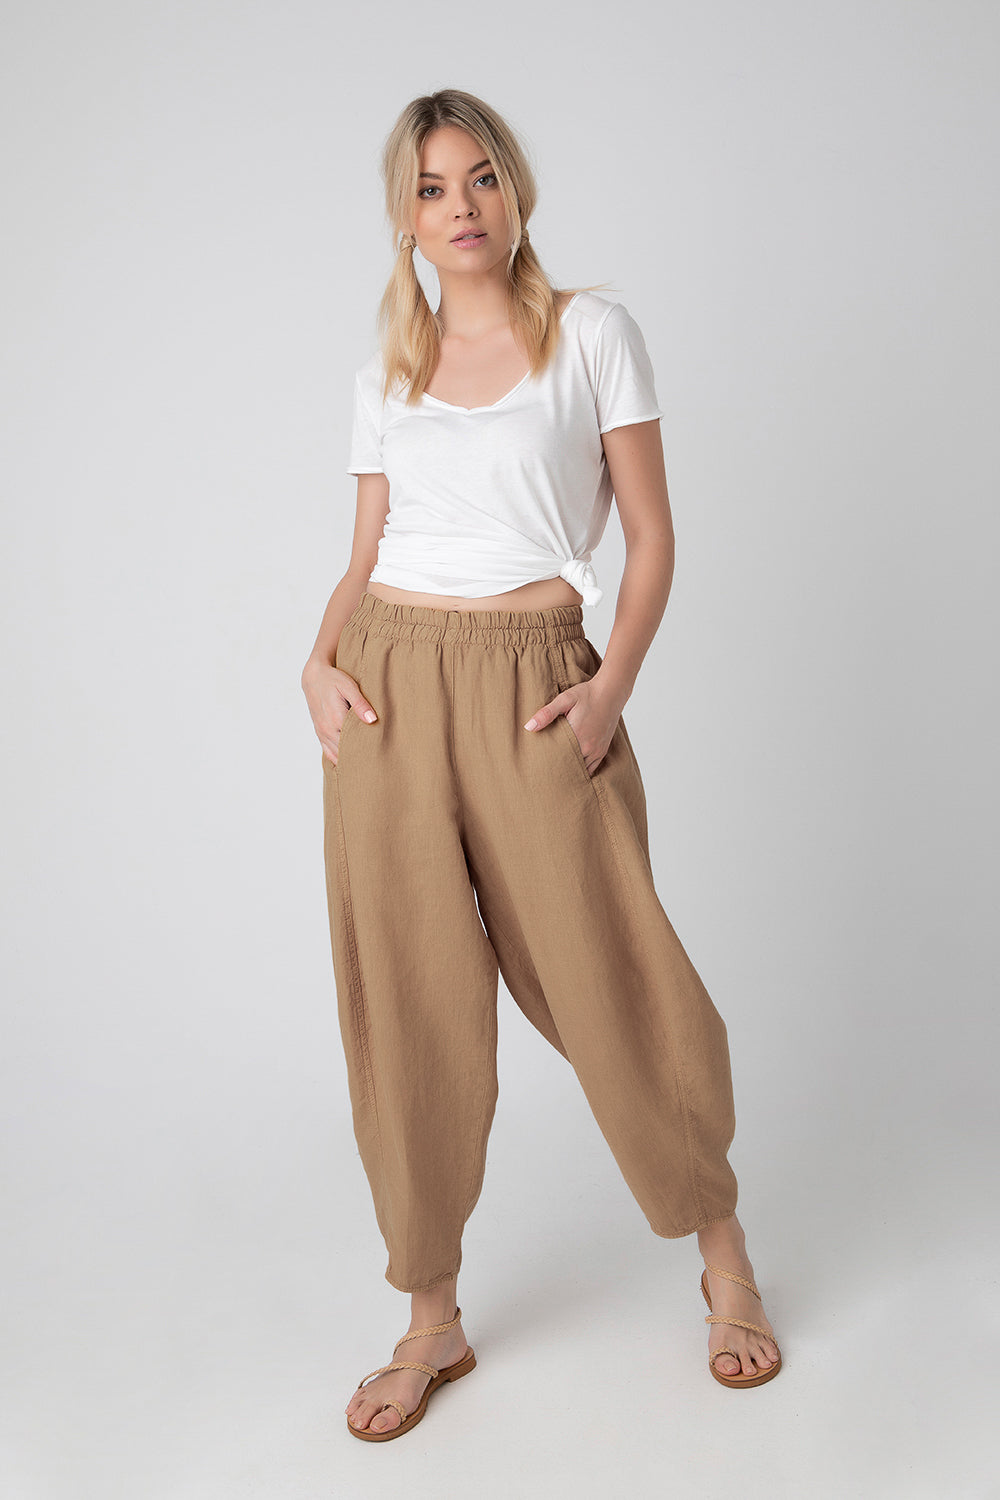 Genie Pant Camel front view